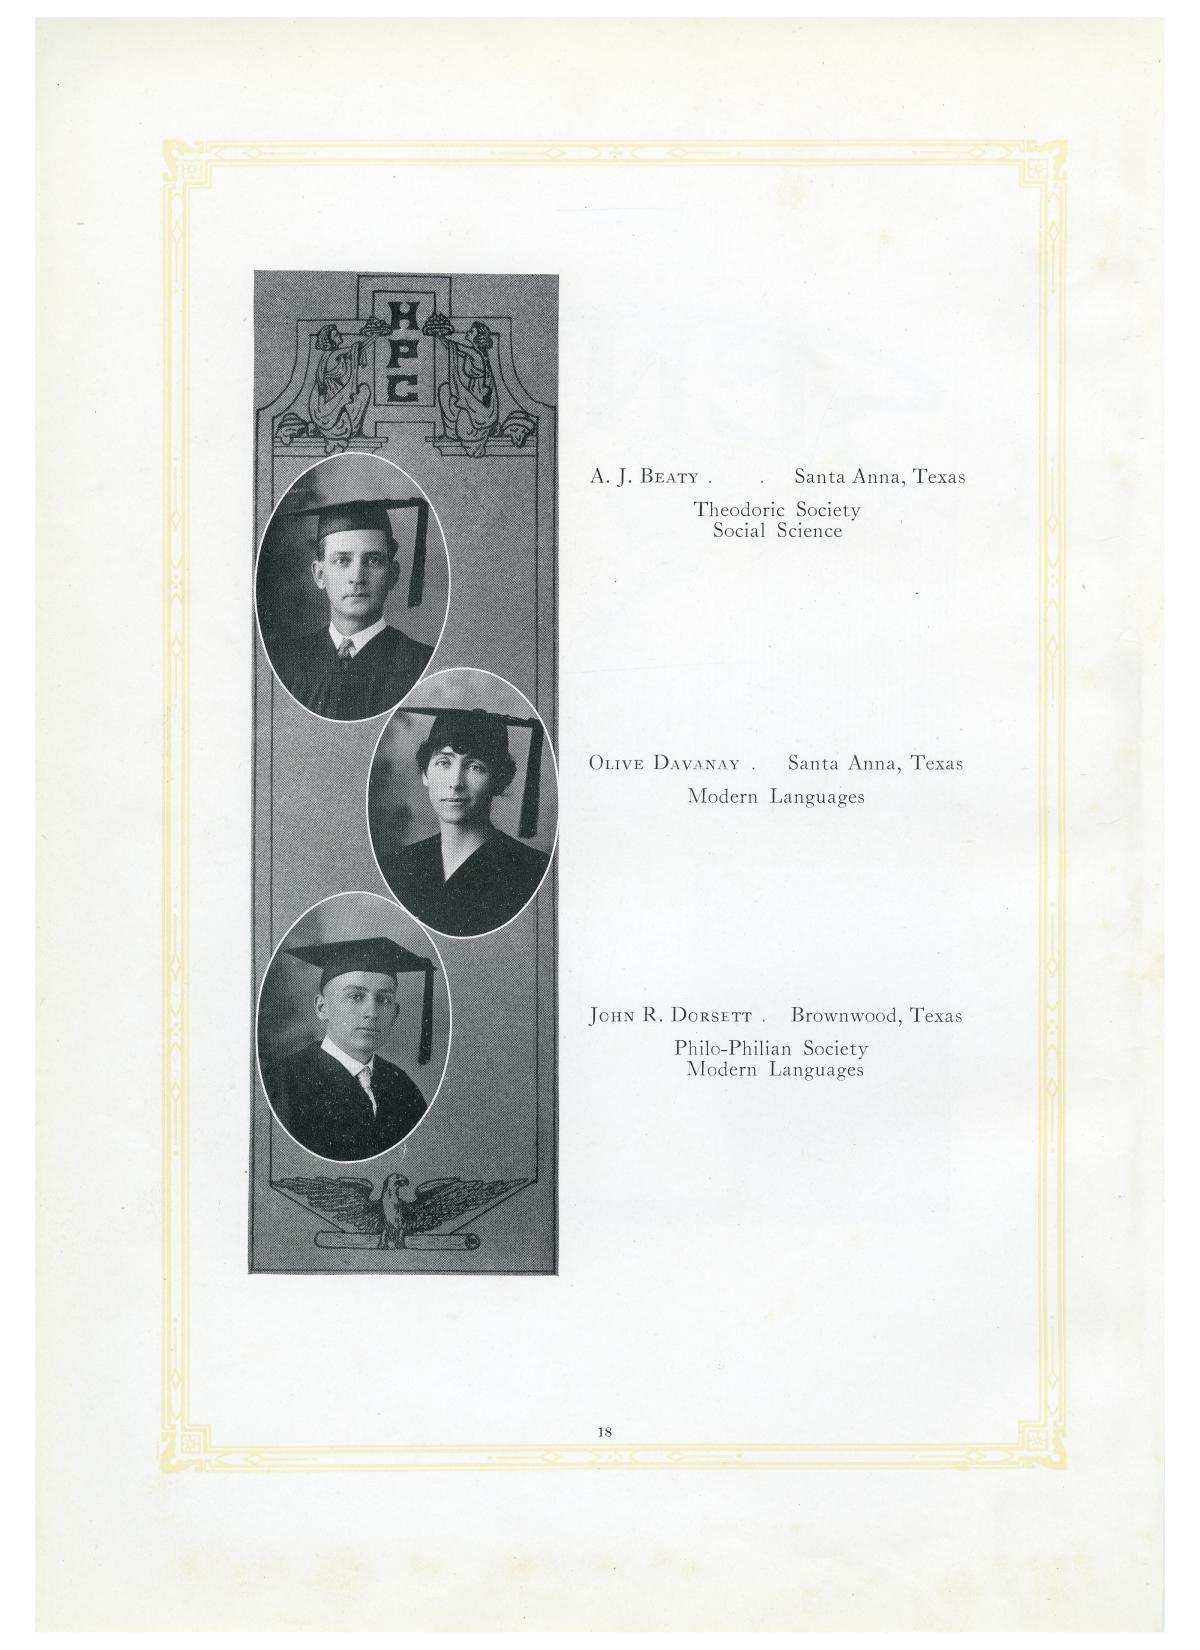 The Lasso, Yearbook of Howard Payne College, 1919
                                                
                                                    18
                                                